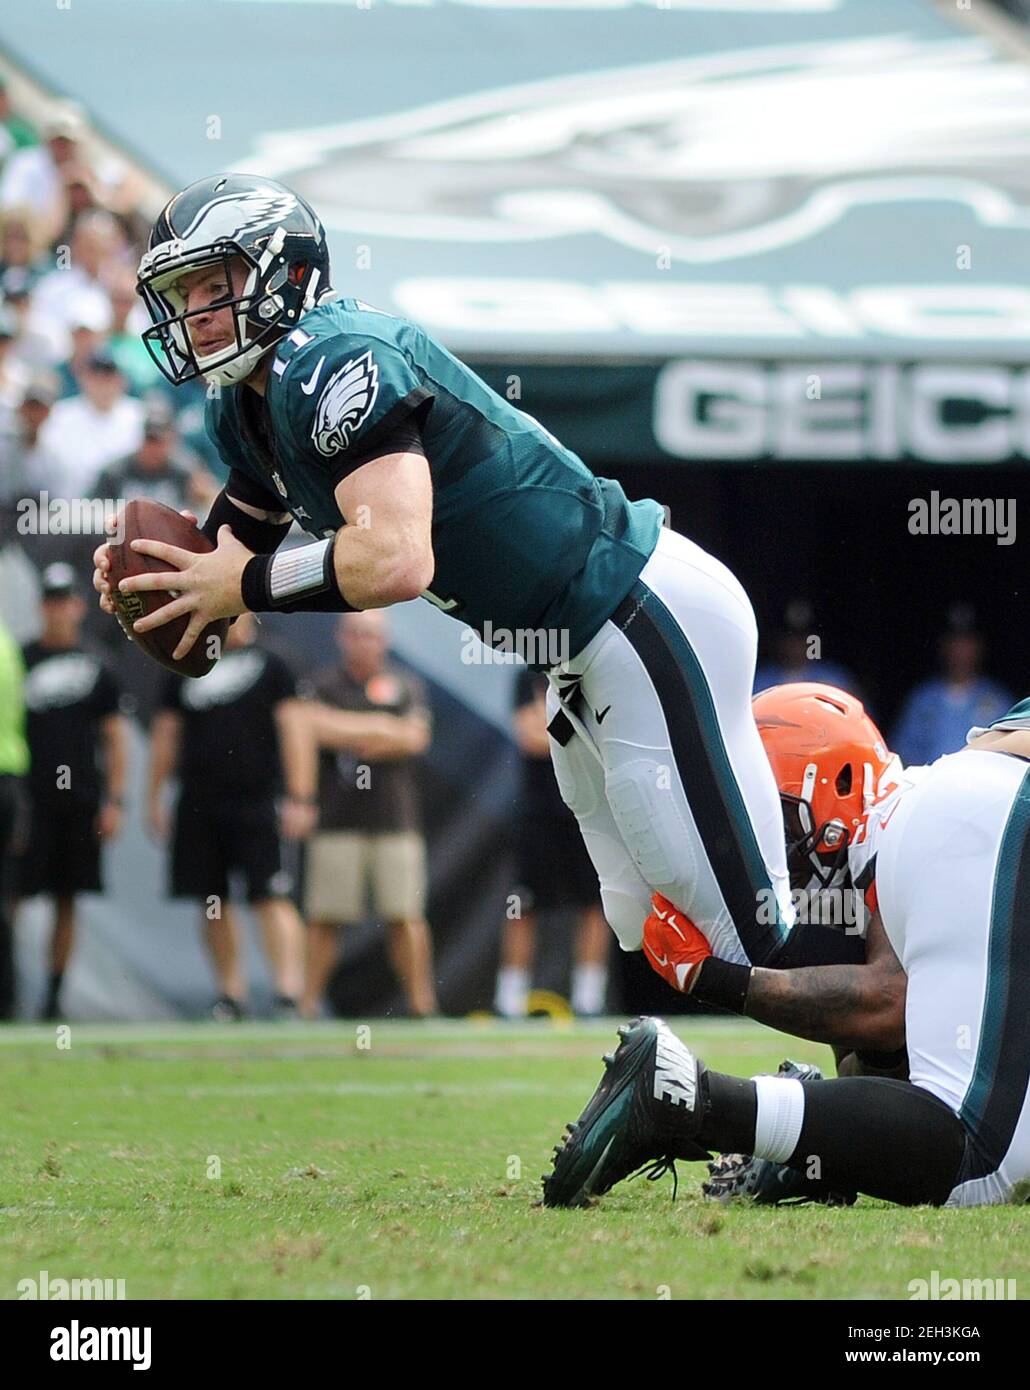 Philadelphia, United States. 11th Sep, 2016. FILE PHOTO: In this September 11, 2016 file photo, Philadelphia Eagles quarterback Carson Wentz is tackled by a Cleveland Browns defender, September 11, 2016 at Lincoln Financial Field in Philadelphia, Pennsylvania. Wentz was traded February 18, 2021, for a second and third round draft pick, to the Indianapolis Colts, reuniting him with Colts head coach and former Philadelphia Eagles offensive coordinator, Frank Reich. ( Credit: William Thomas Cain/Alamy Live News Stock Photo